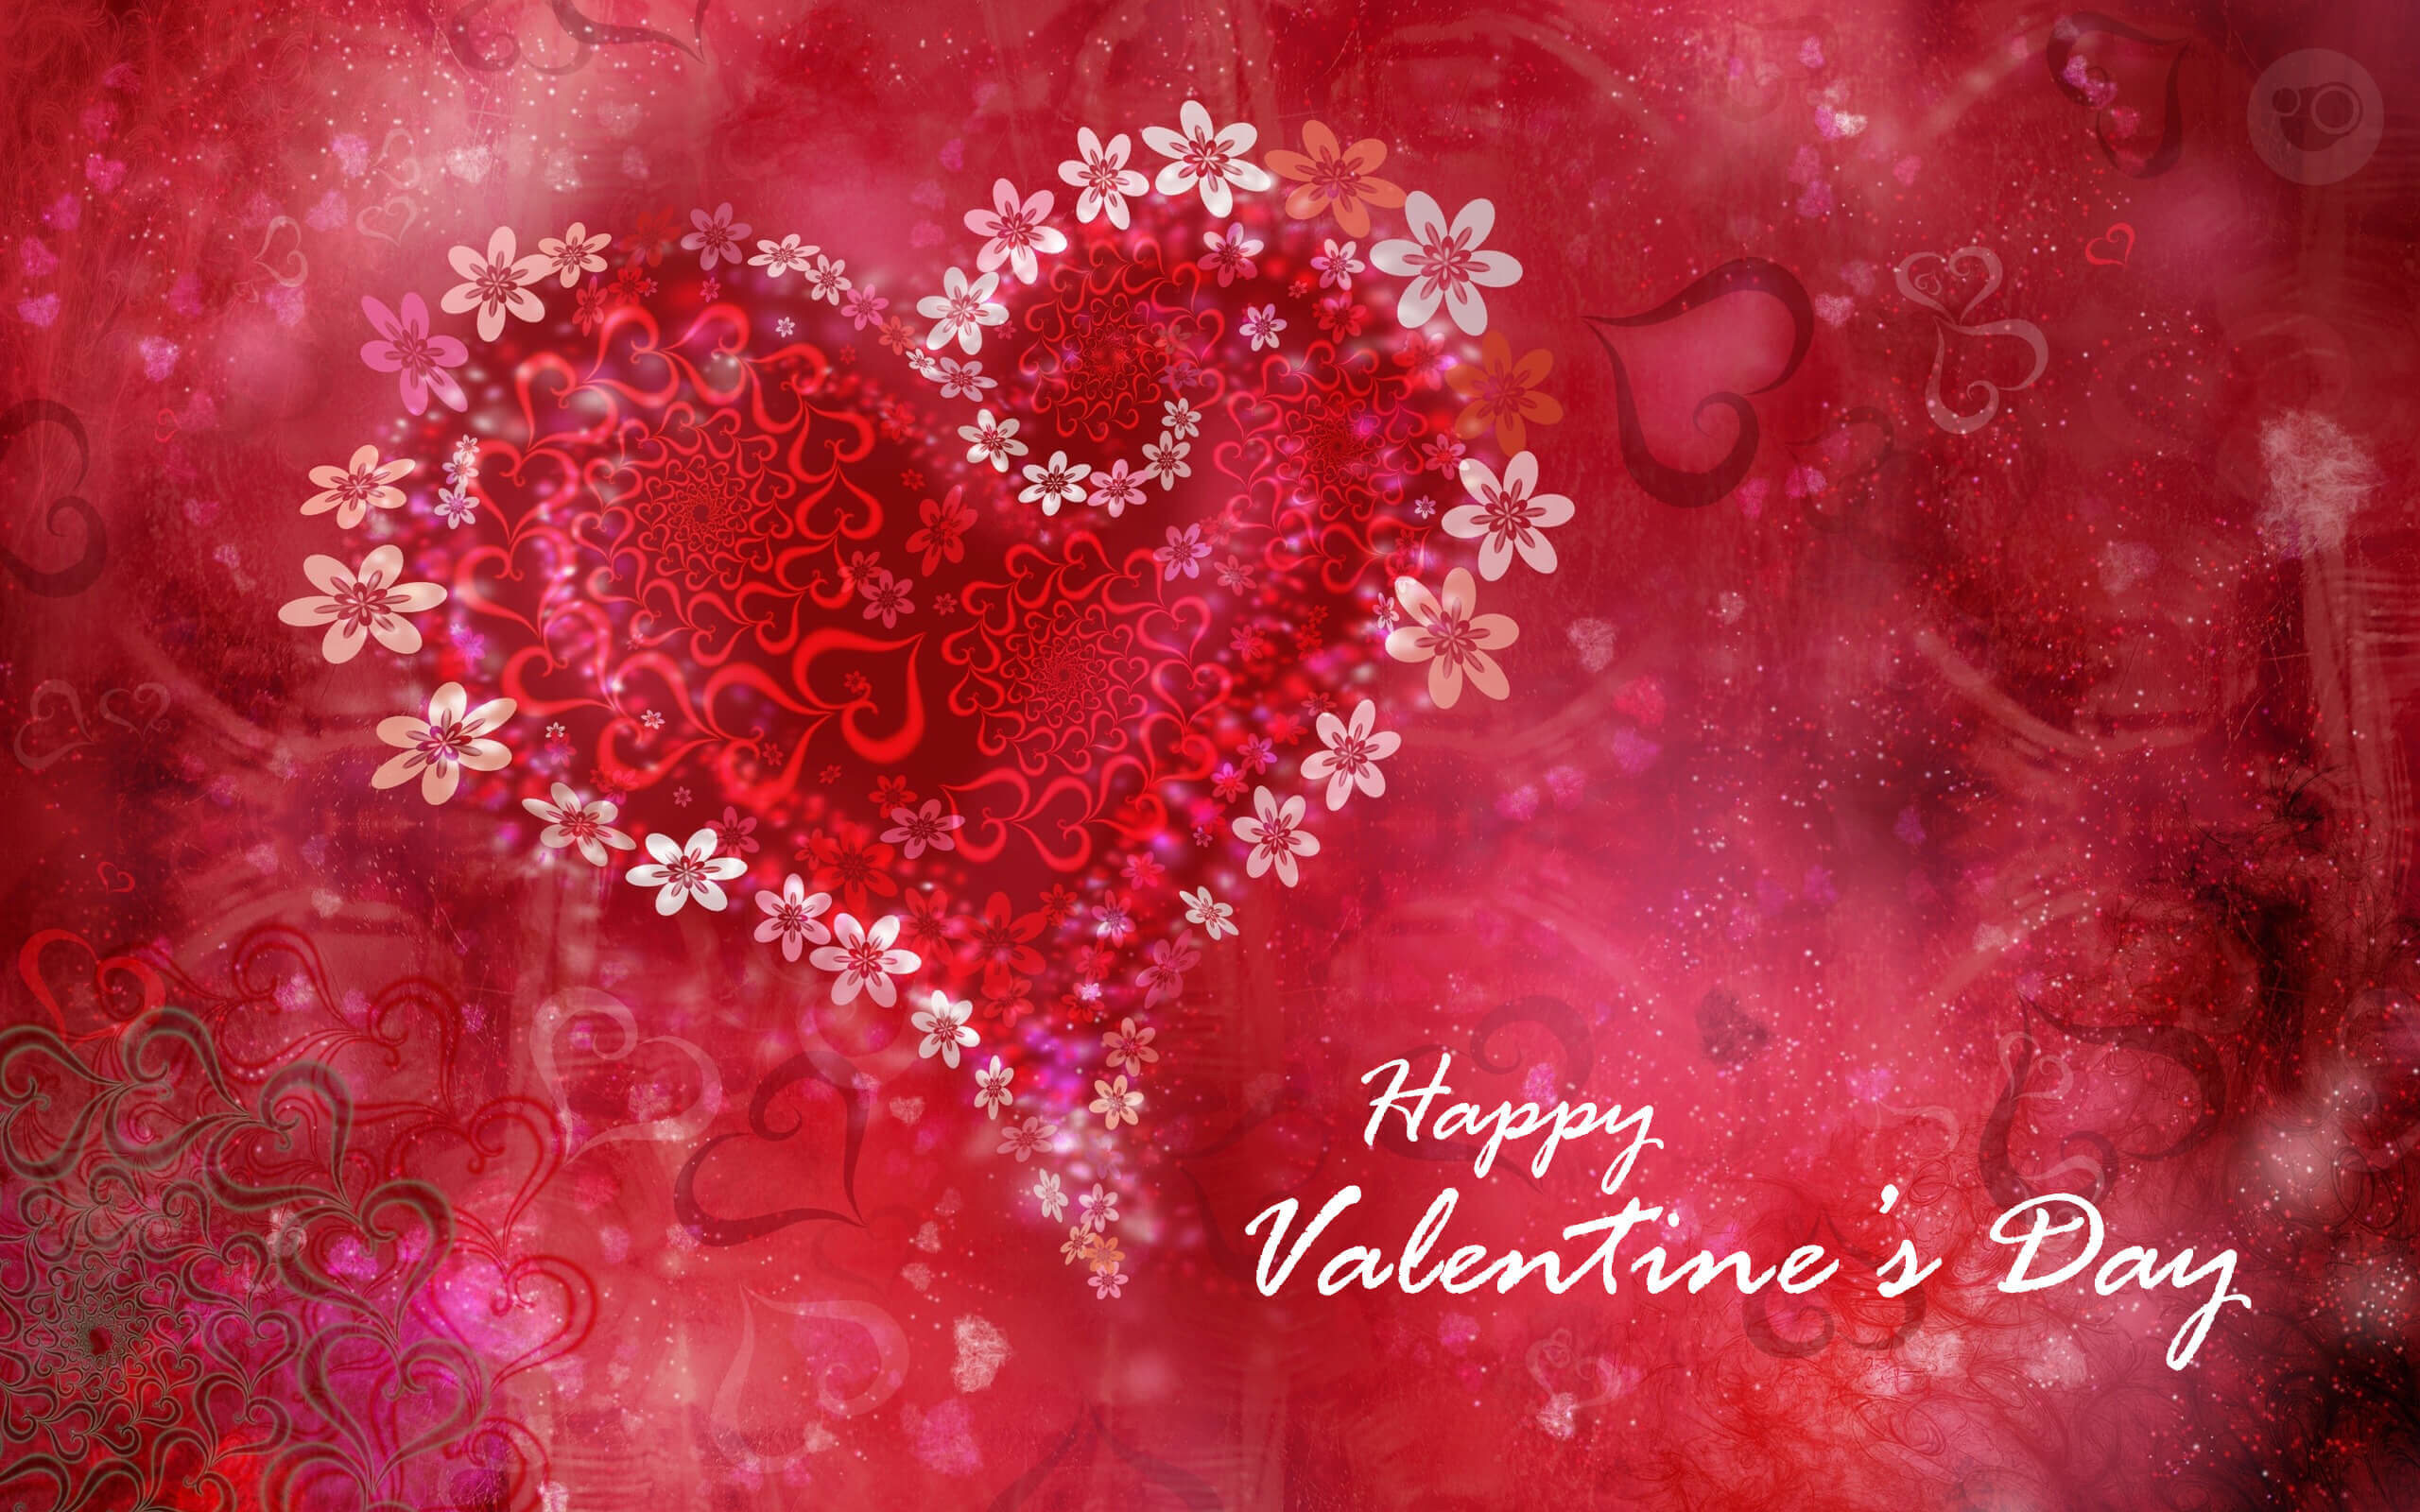 Happy valentines day hd wallpapers free download 2